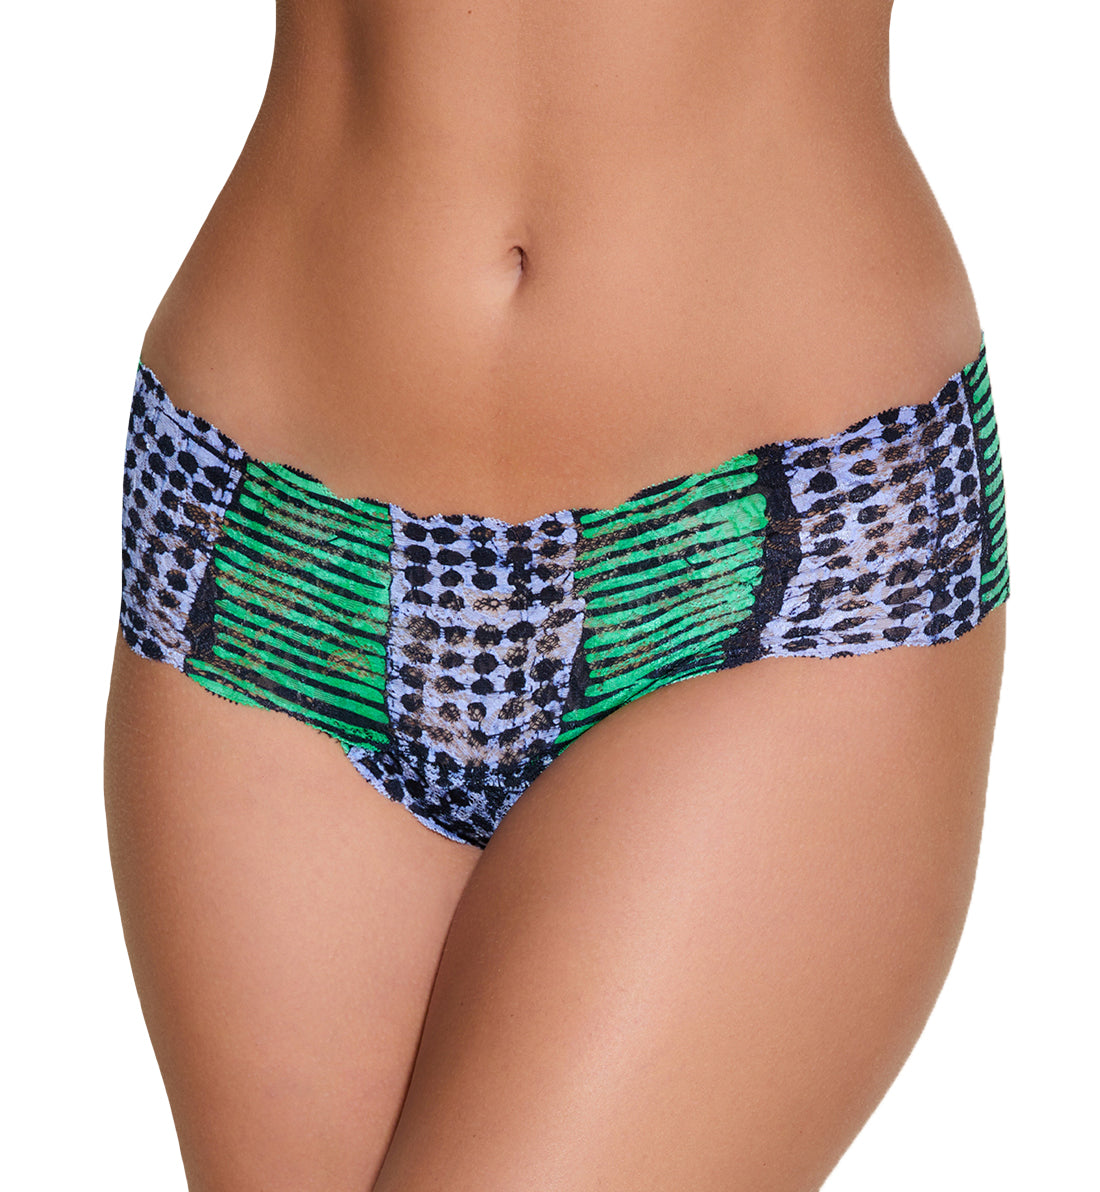 Cosabella Never Say Never Printed Hottie Lowrider Hotpant (NEVEP07ZL),S/M,Aggie - Aggie,S/M